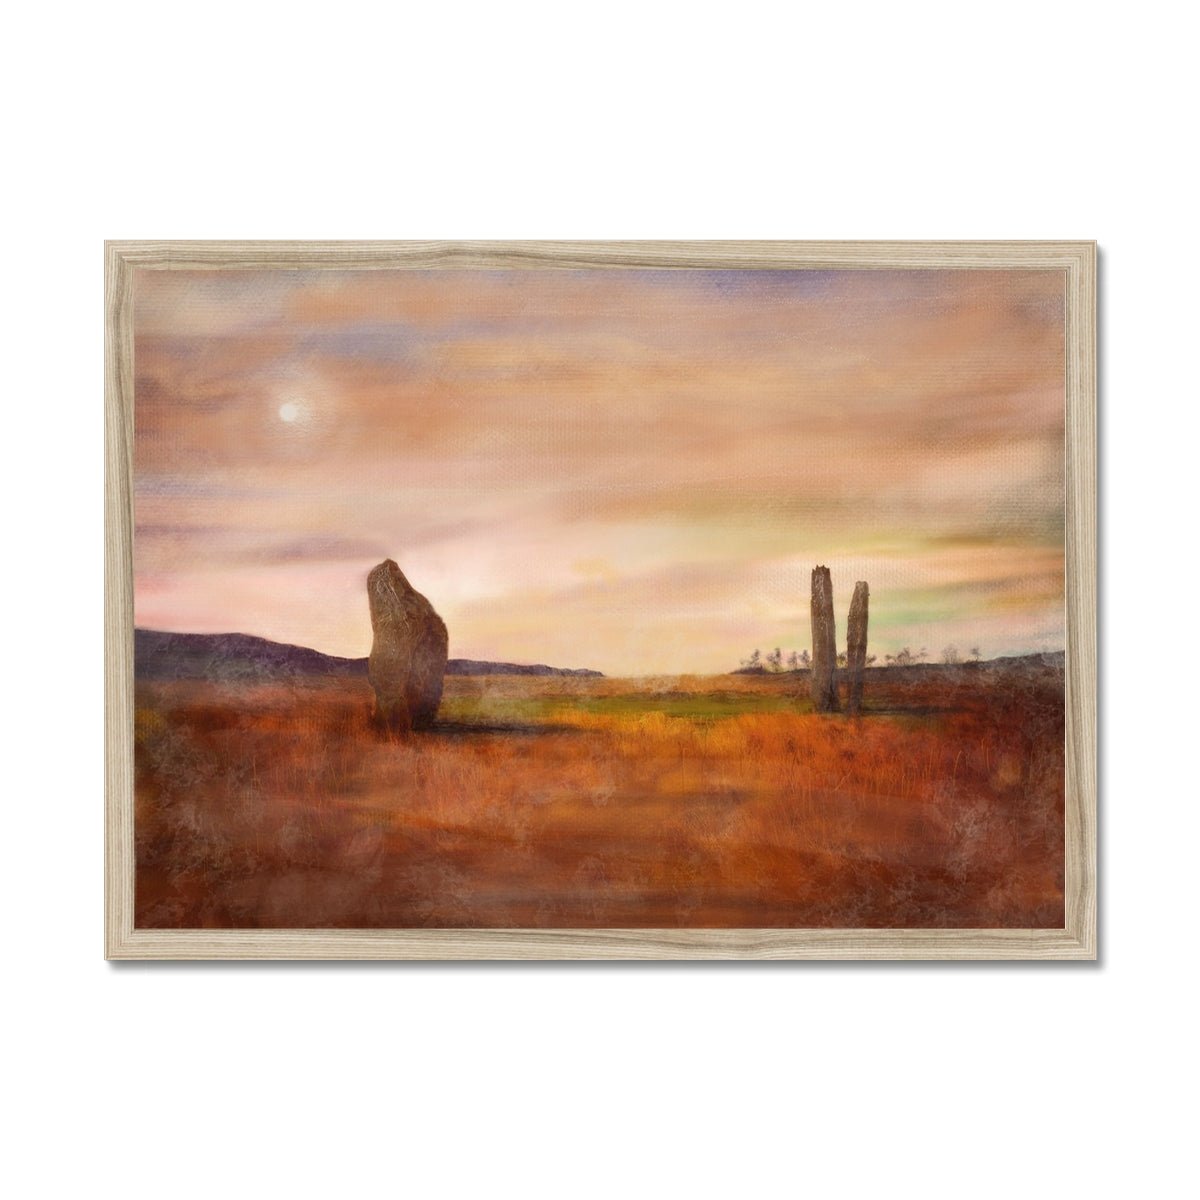 Machrie Moor Moonlight Painting | Framed Prints From Scotland-Framed Prints-Arran Art Gallery-A2 Landscape-Natural Frame-Paintings, Prints, Homeware, Art Gifts From Scotland By Scottish Artist Kevin Hunter